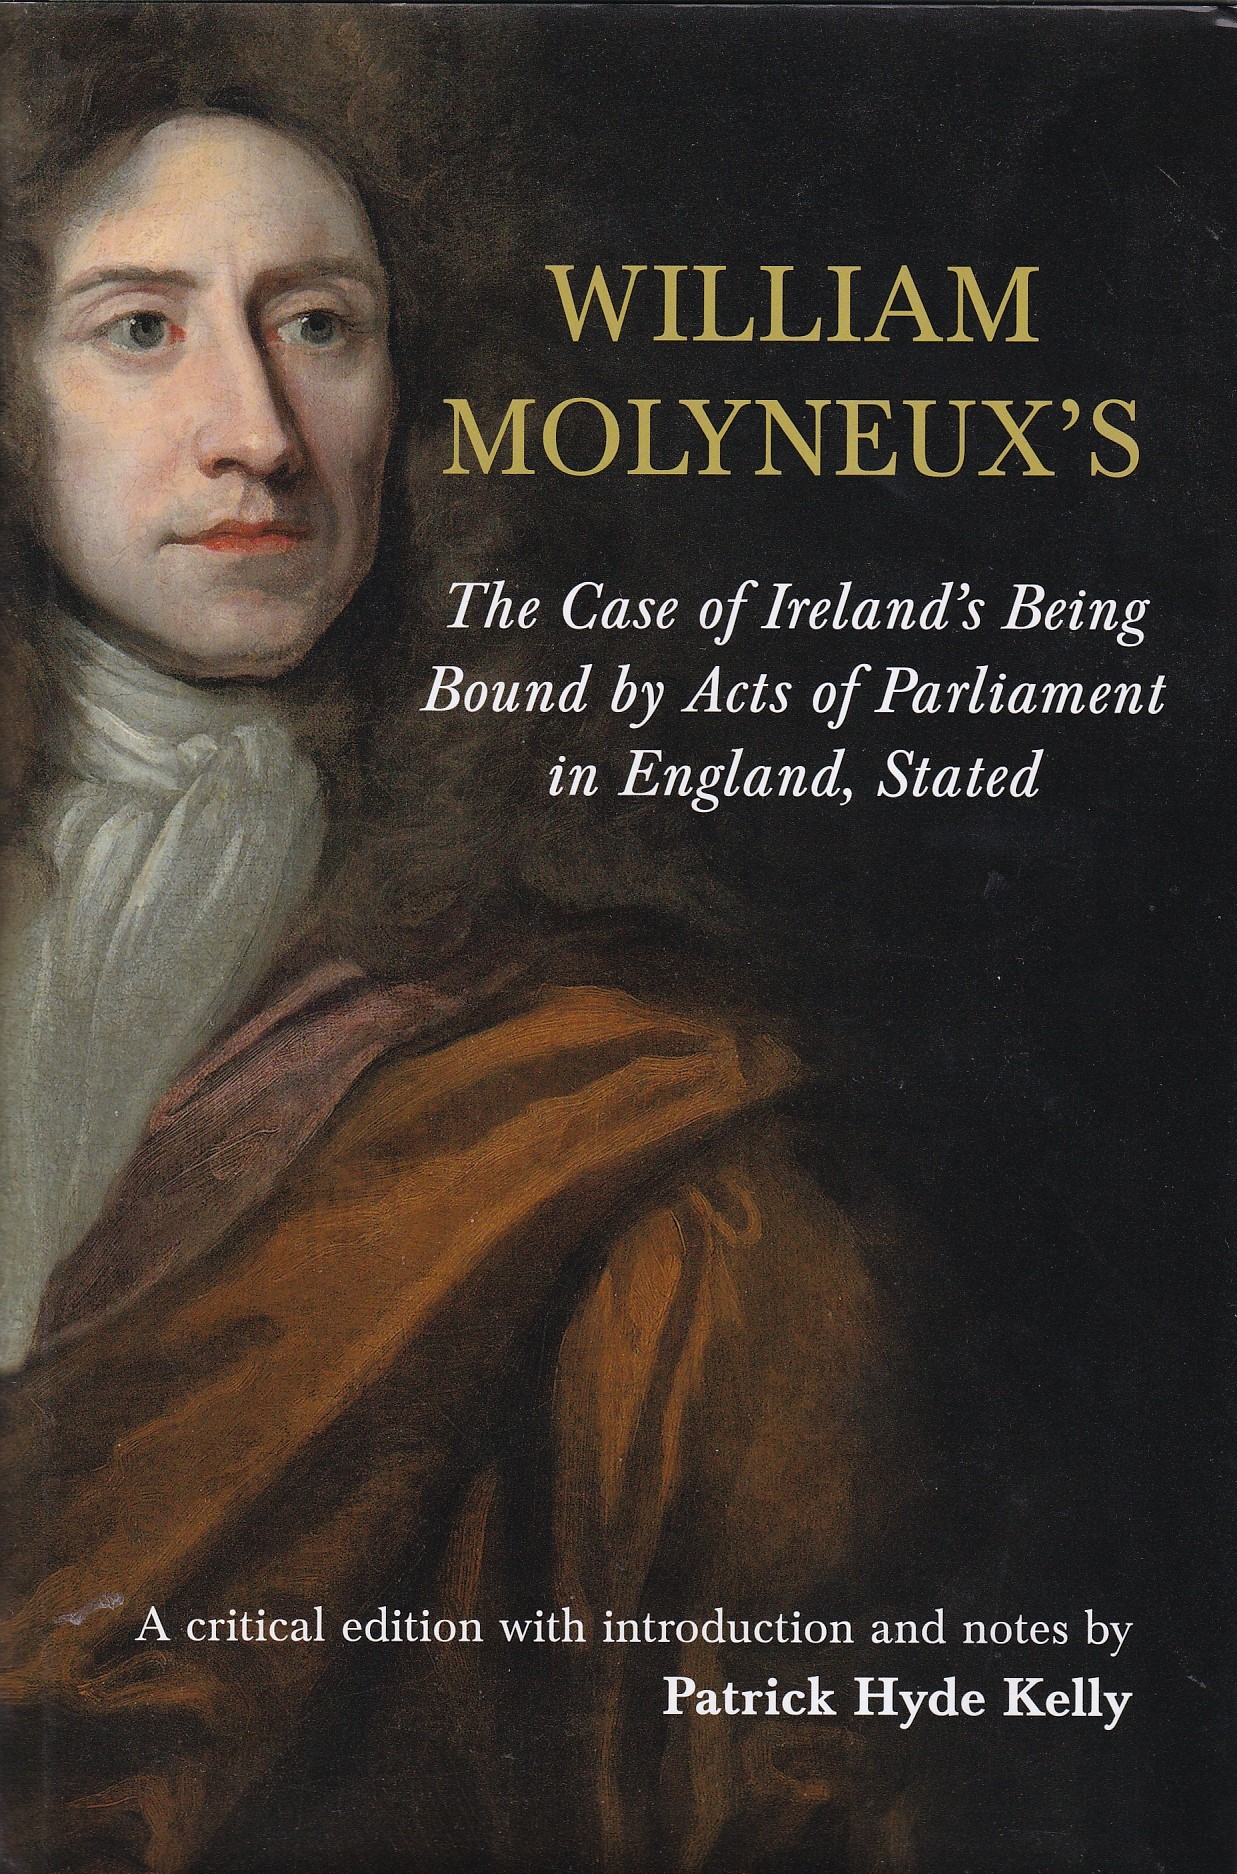 William Molyneux’s ‘The Case of Ireland’s Being Bound by Acts of Parliament in England, Stated’ by Patrick Hyde Kelly